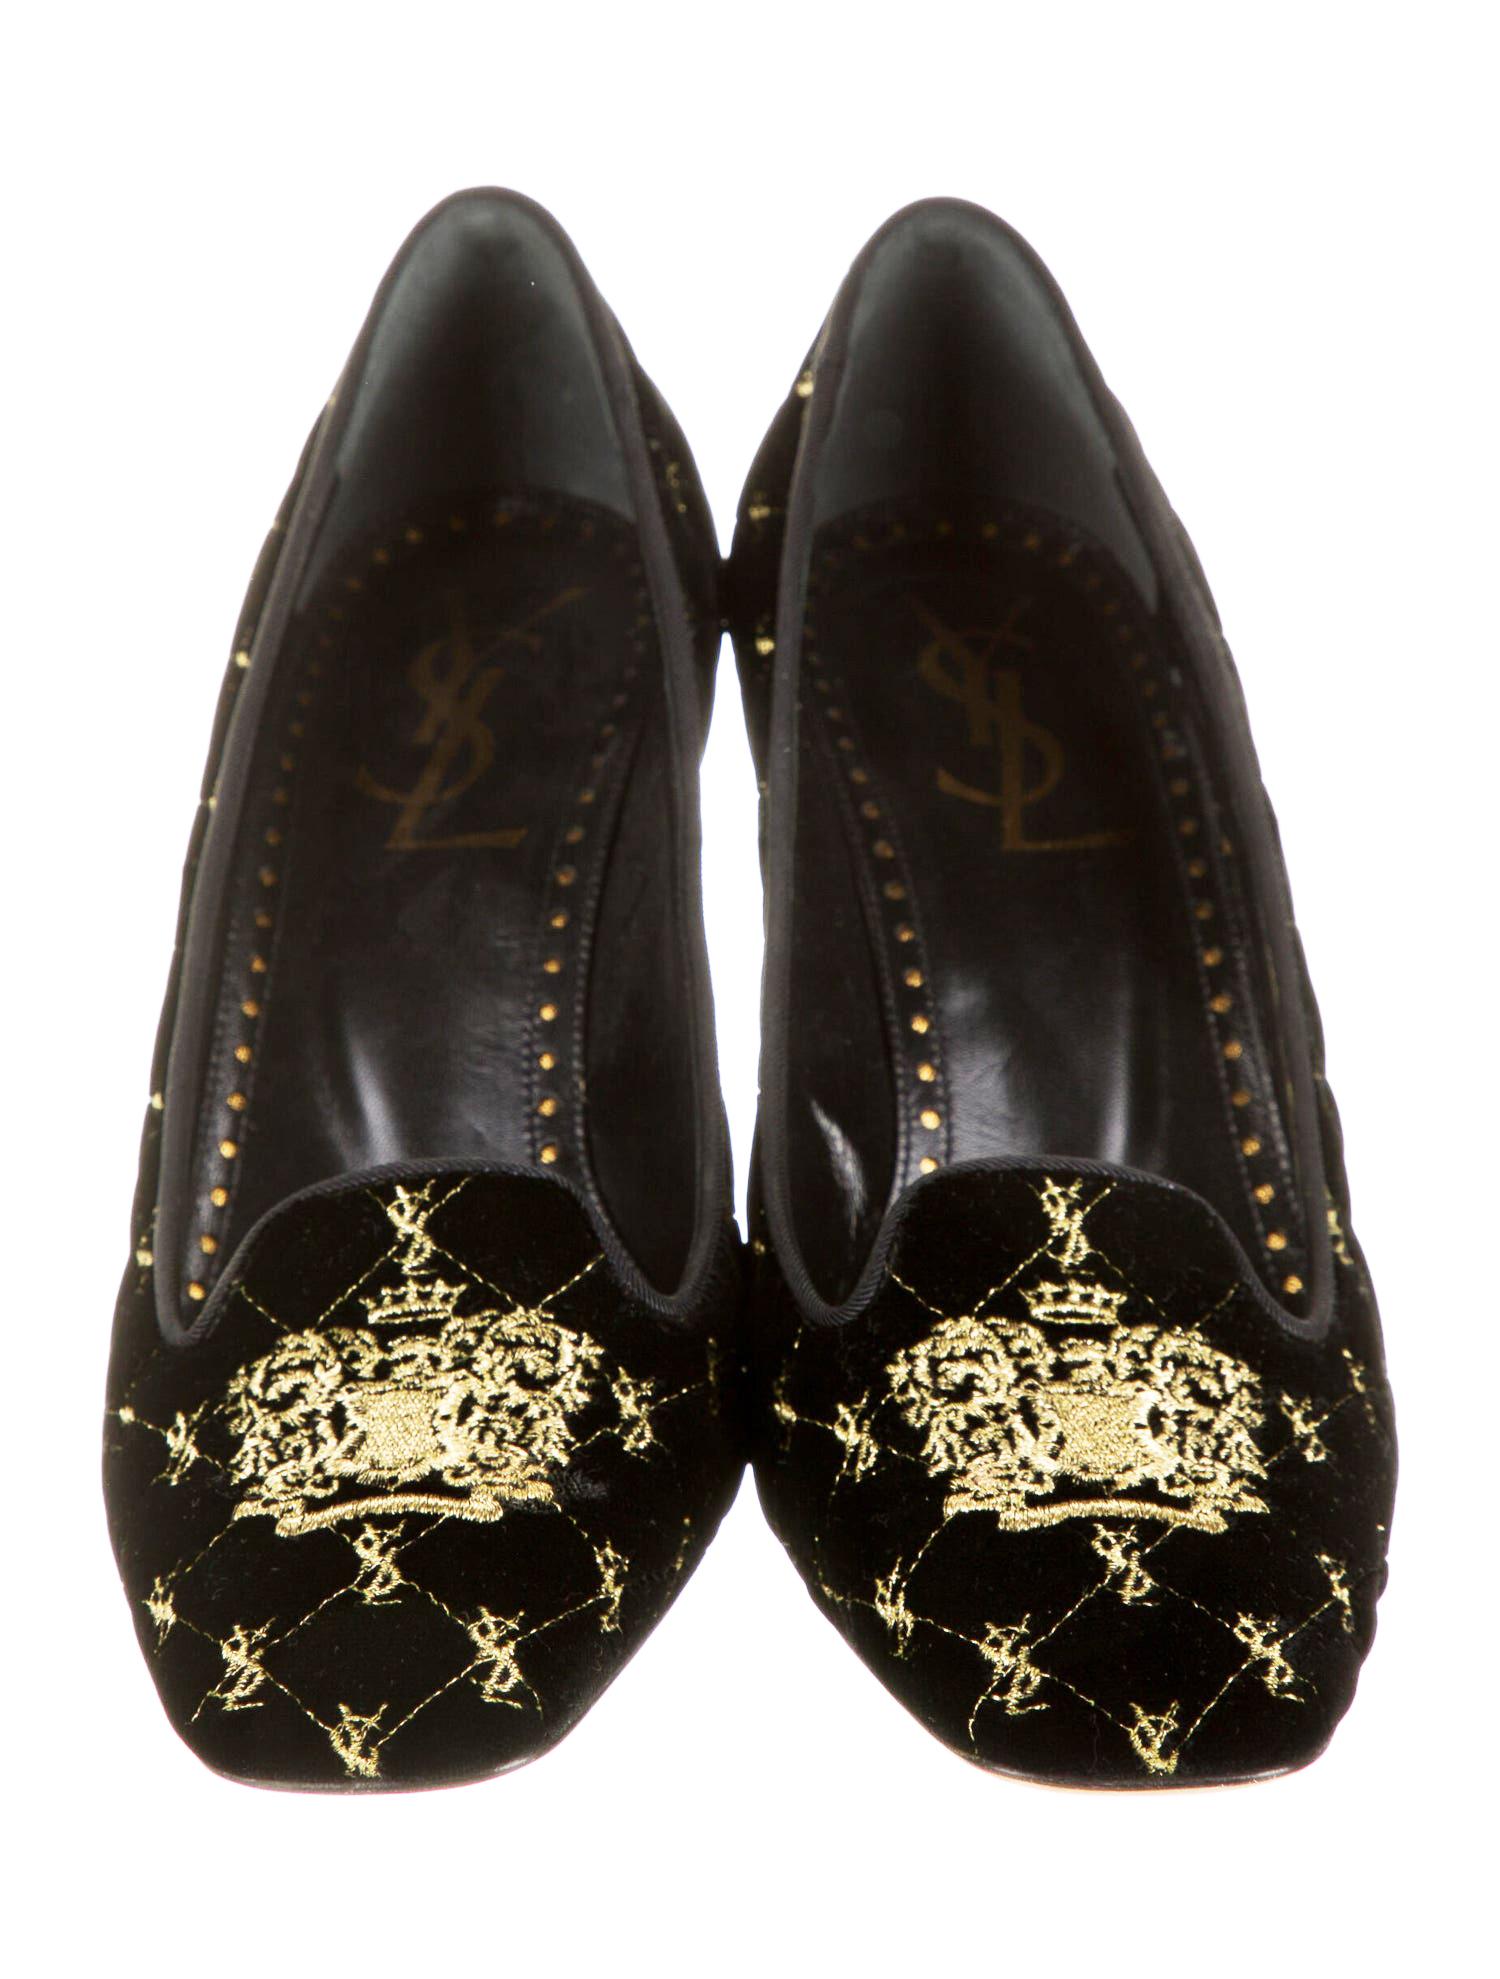 New and Rare Yves Saint Laurent Black Velvet Monogram Pumps Shoes
Designer size 39.5 - US 9.5
Midnight Black Velvet, Gold Metallic Embroidery of YVES  Monogram with the Quilted Look, Embroidery of Family Coat of Arms.
Branded Leather Insole, Leather